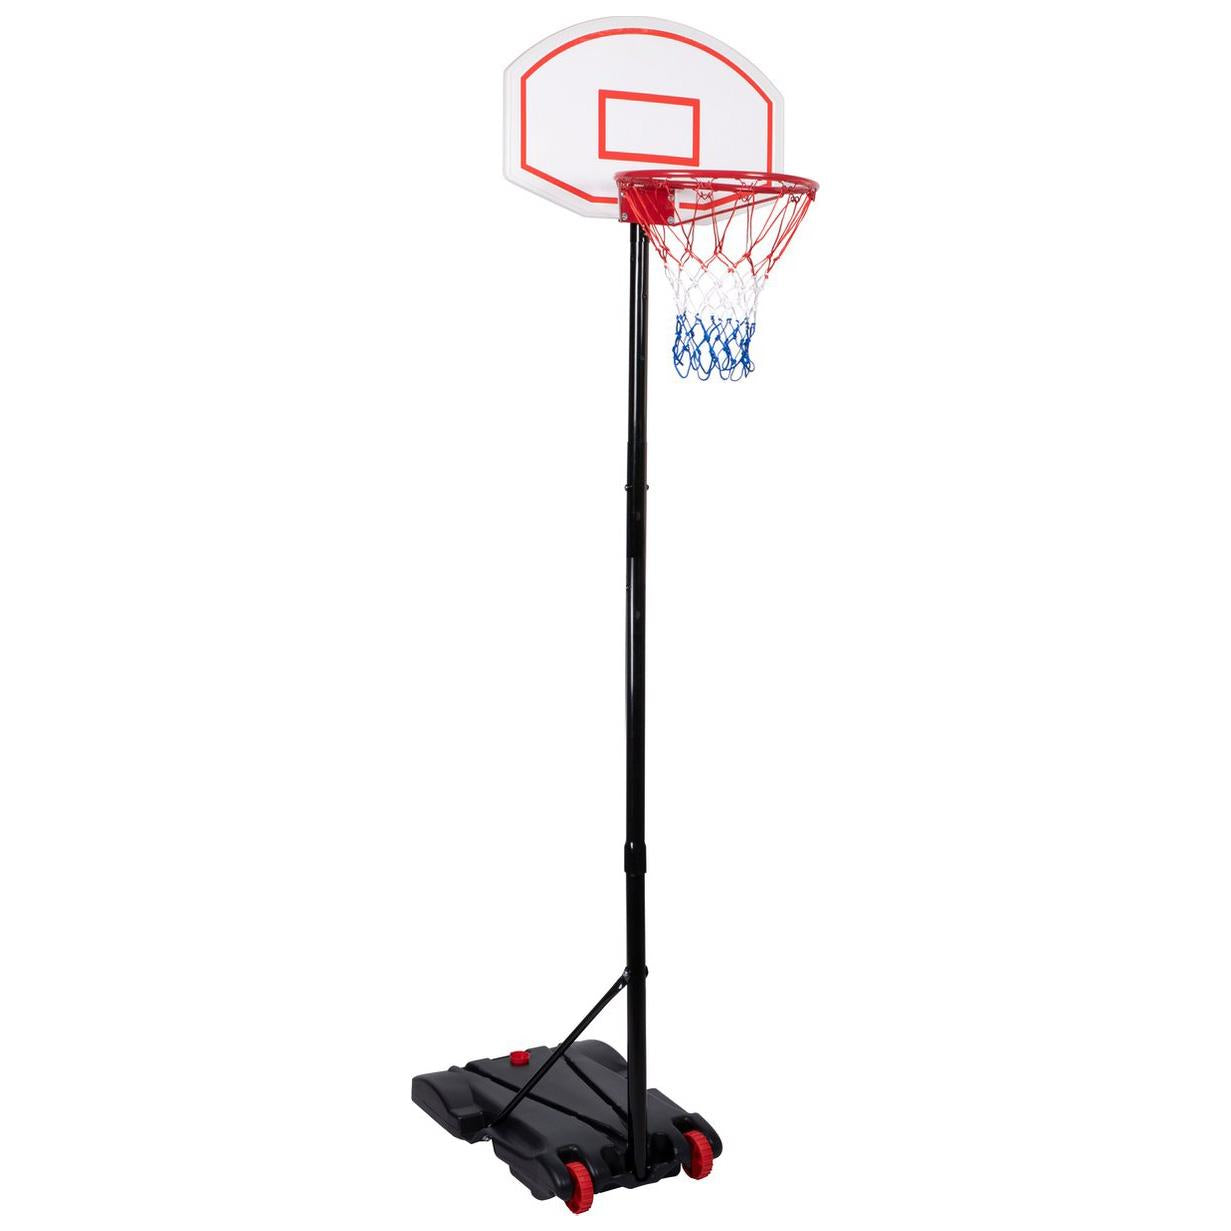 Portable Basketball Stand with Hoop by The Magic Toy Shop - UKBuyZone